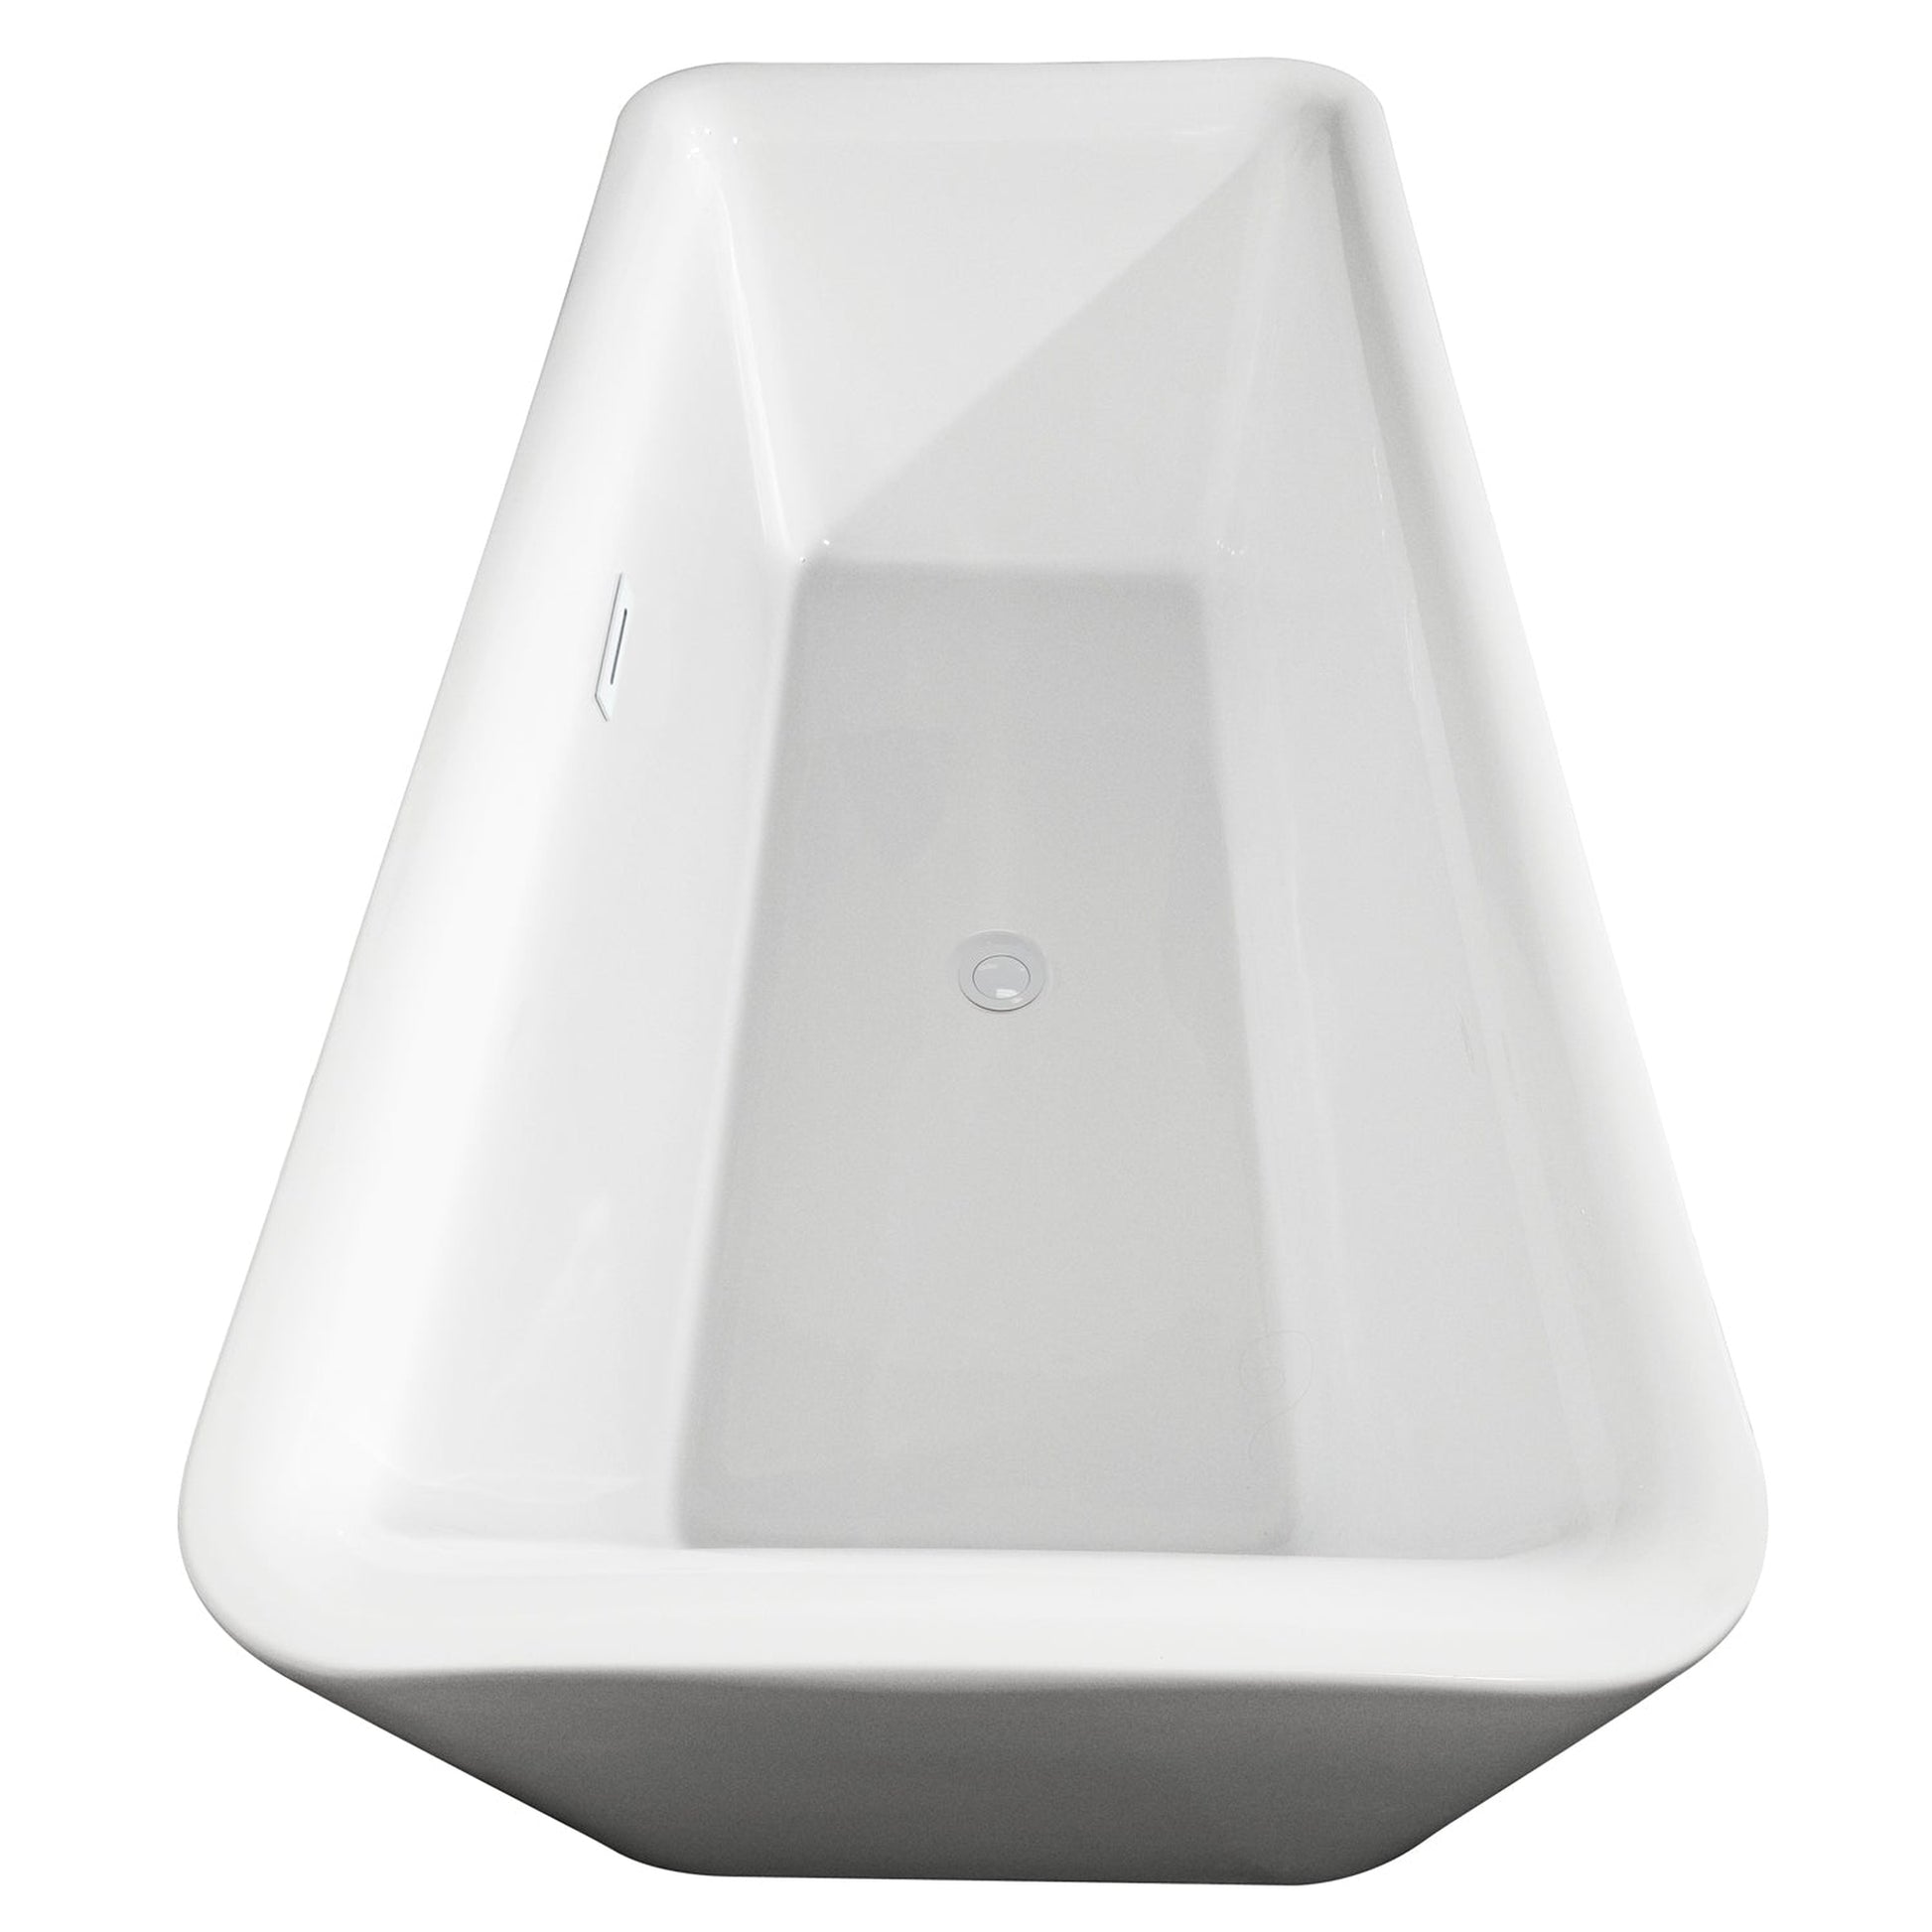 Wyndham Collection Emily 69" Freestanding Bathtub in White With Shiny White Trim and Floor Mounted Faucet in Brushed Gold